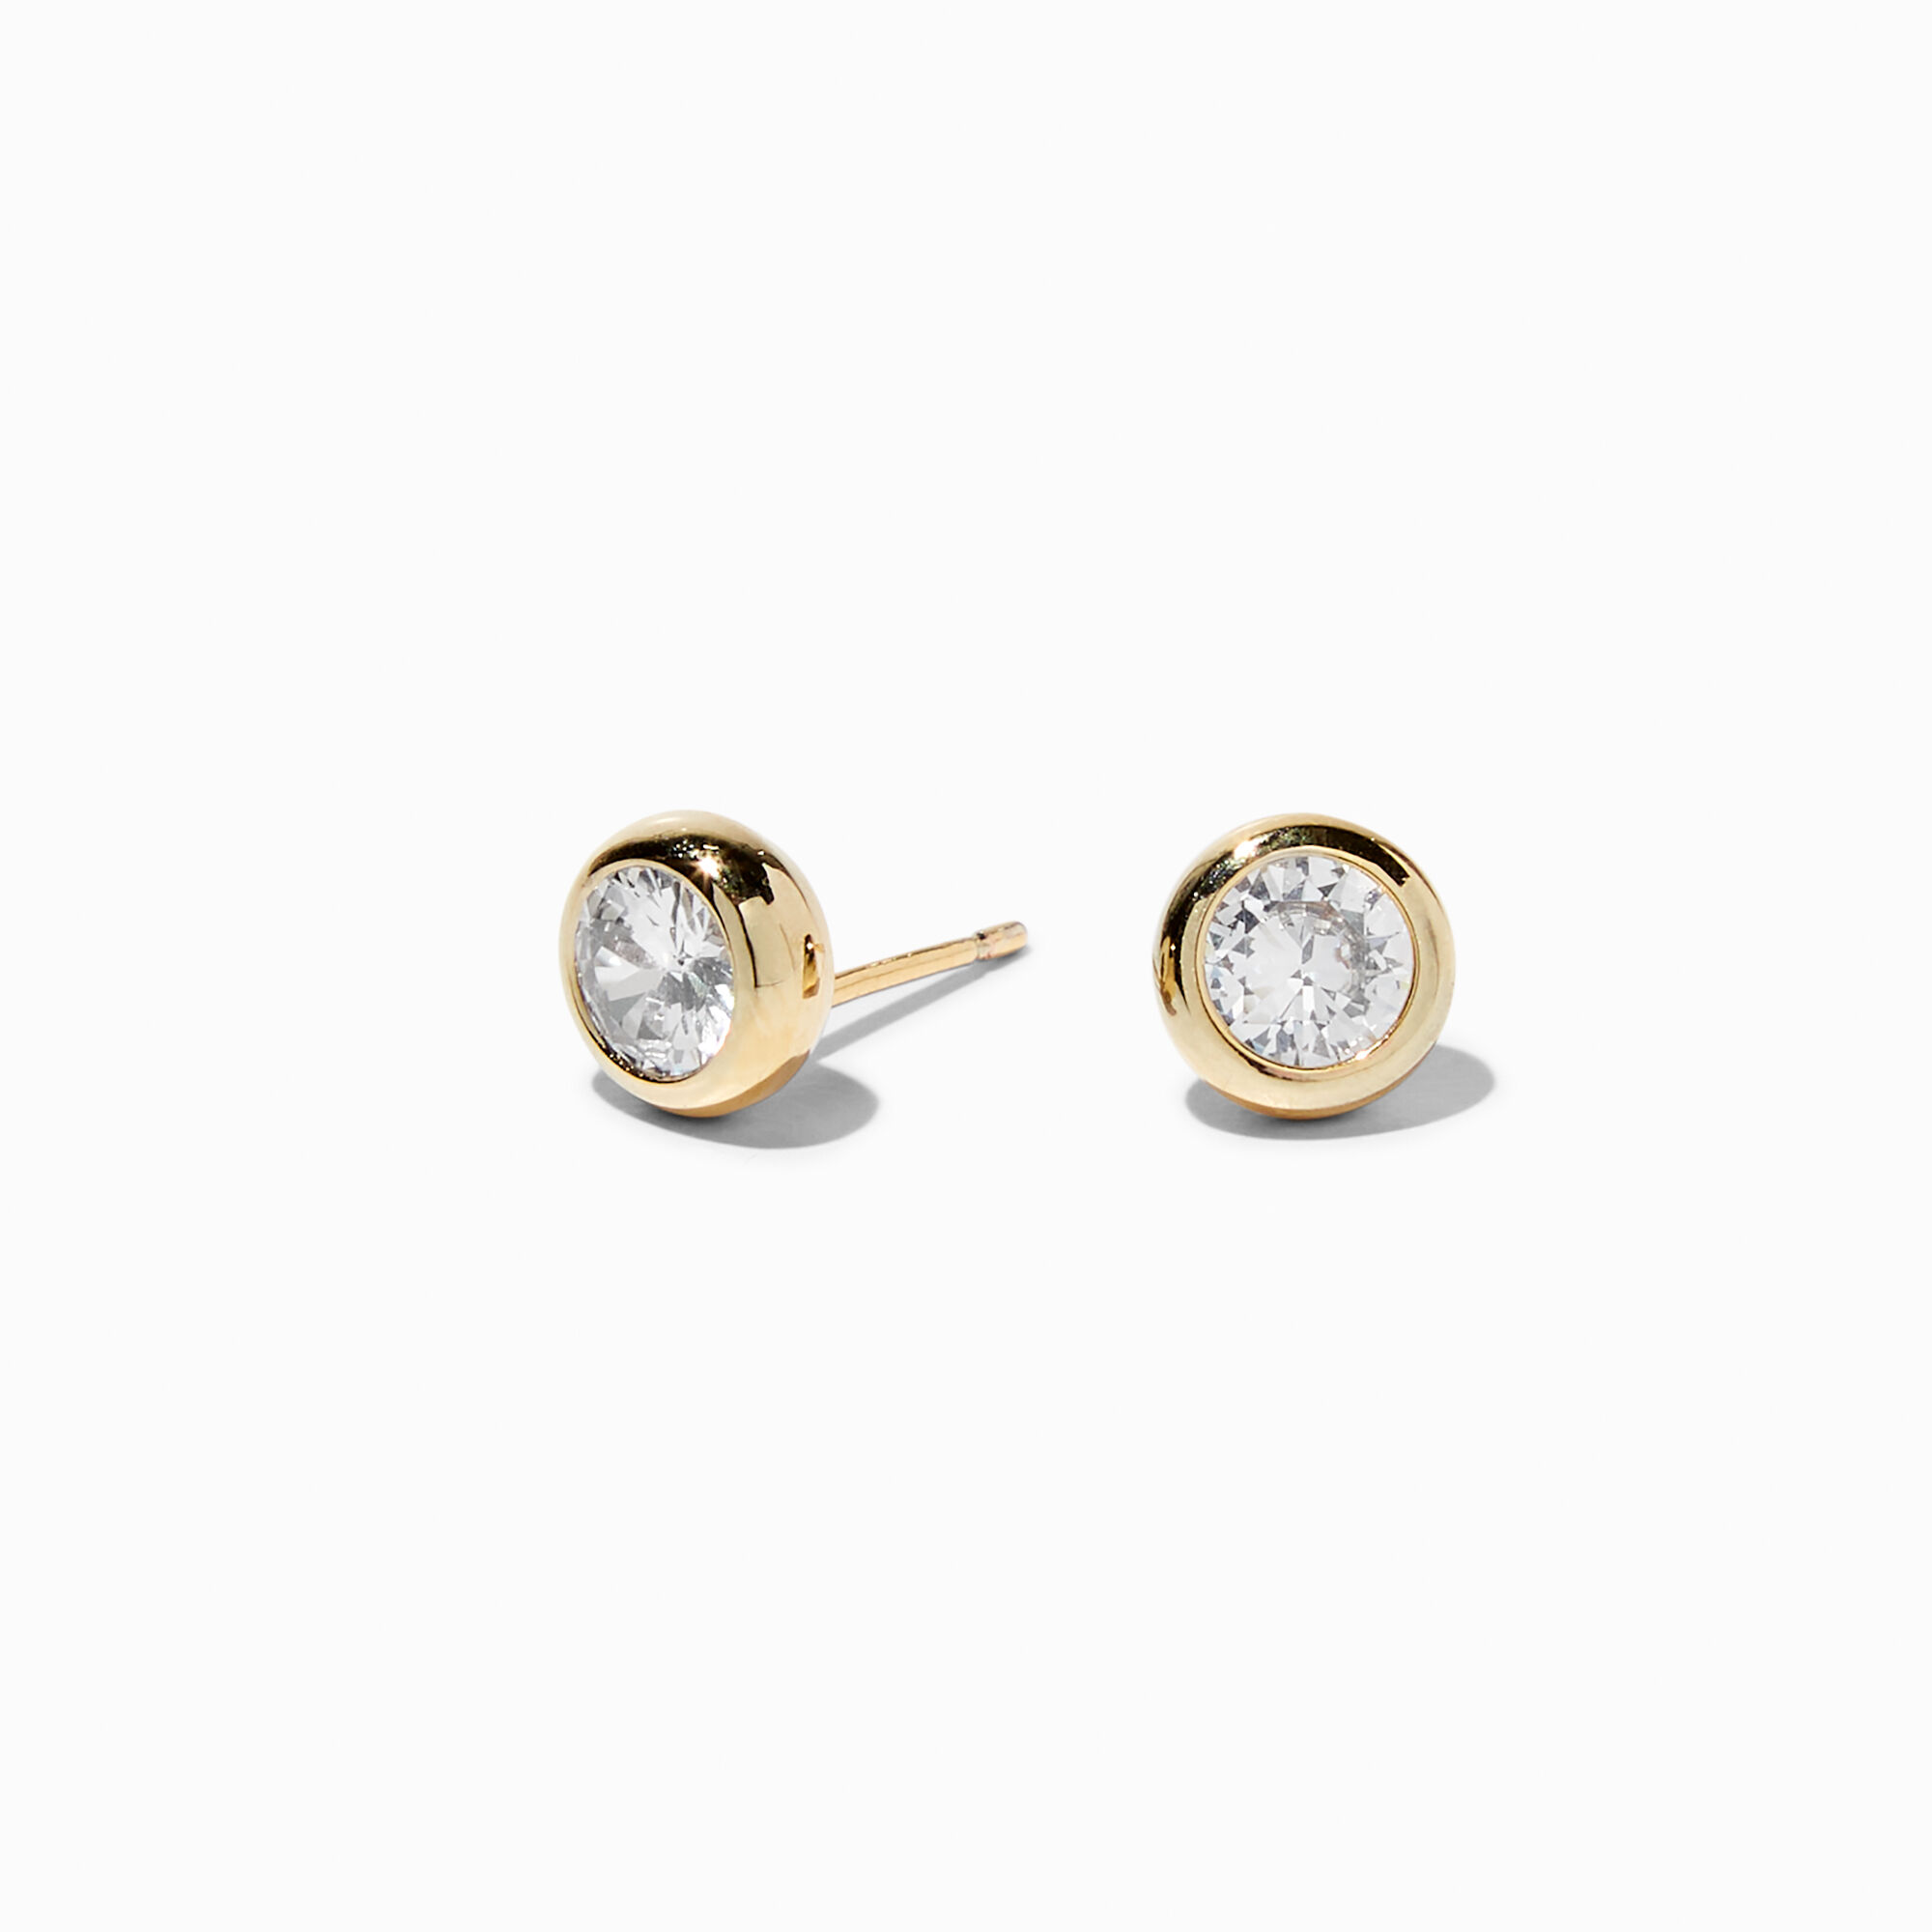 View Claires 18K Plated Cubic Zirconia 7MM Round Bezel Stud Earrings Gold information